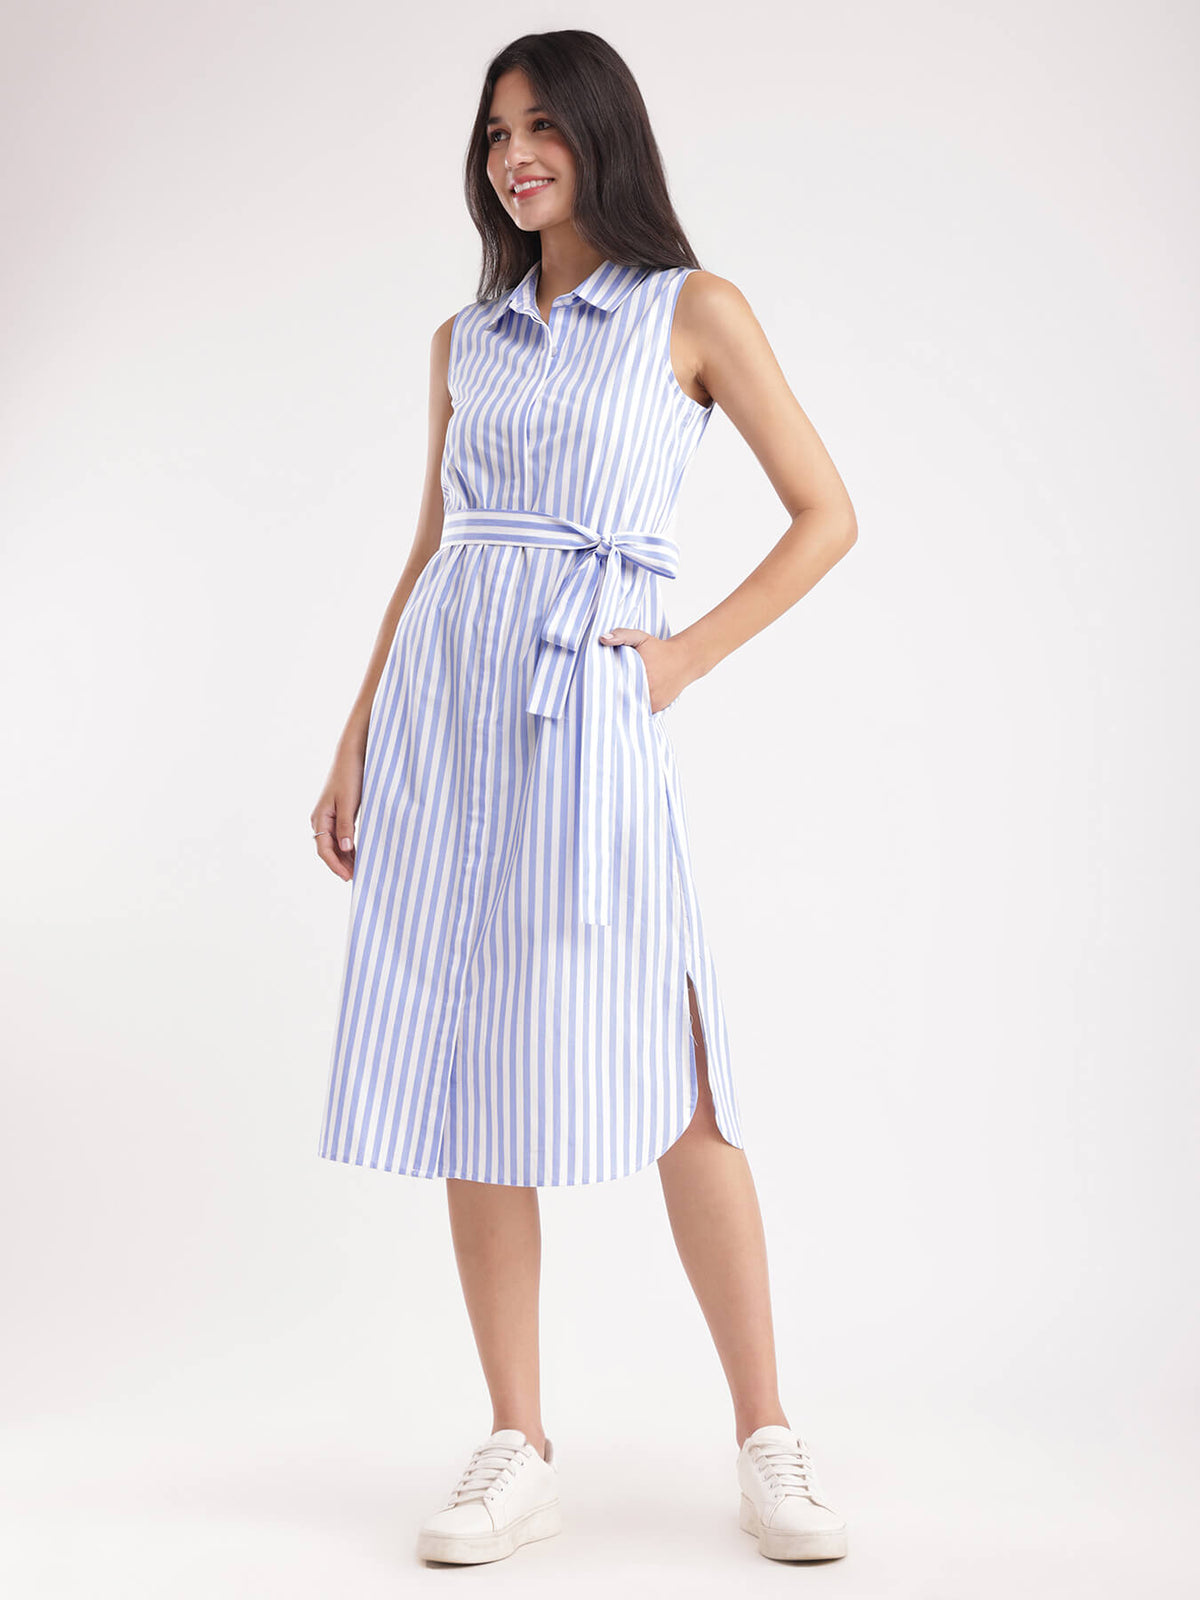 Cotton Striped Dress - Blue And White